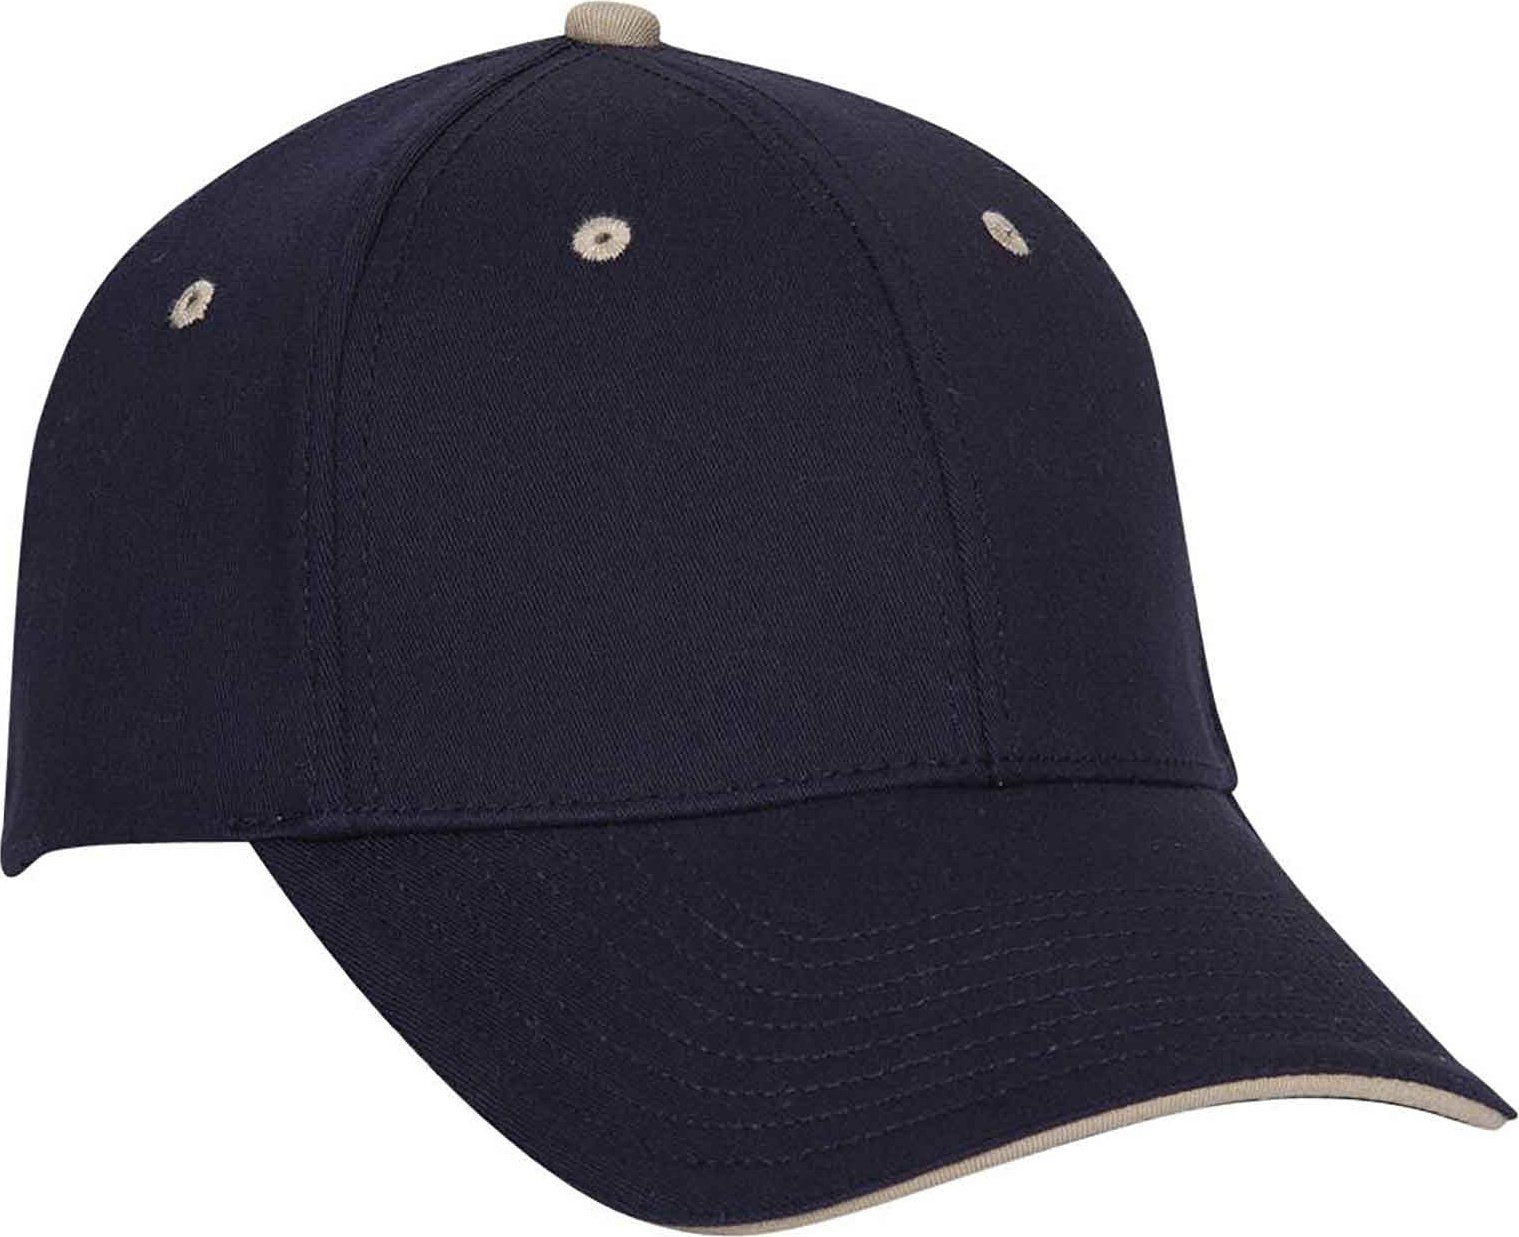 OTTO 12-267 Stretchable Deluxe Brushed Cotton Twill Sandwich Visor Low Profile Pro Style Cap S/M - Navy Navy Khaki - HIT a Double - 1